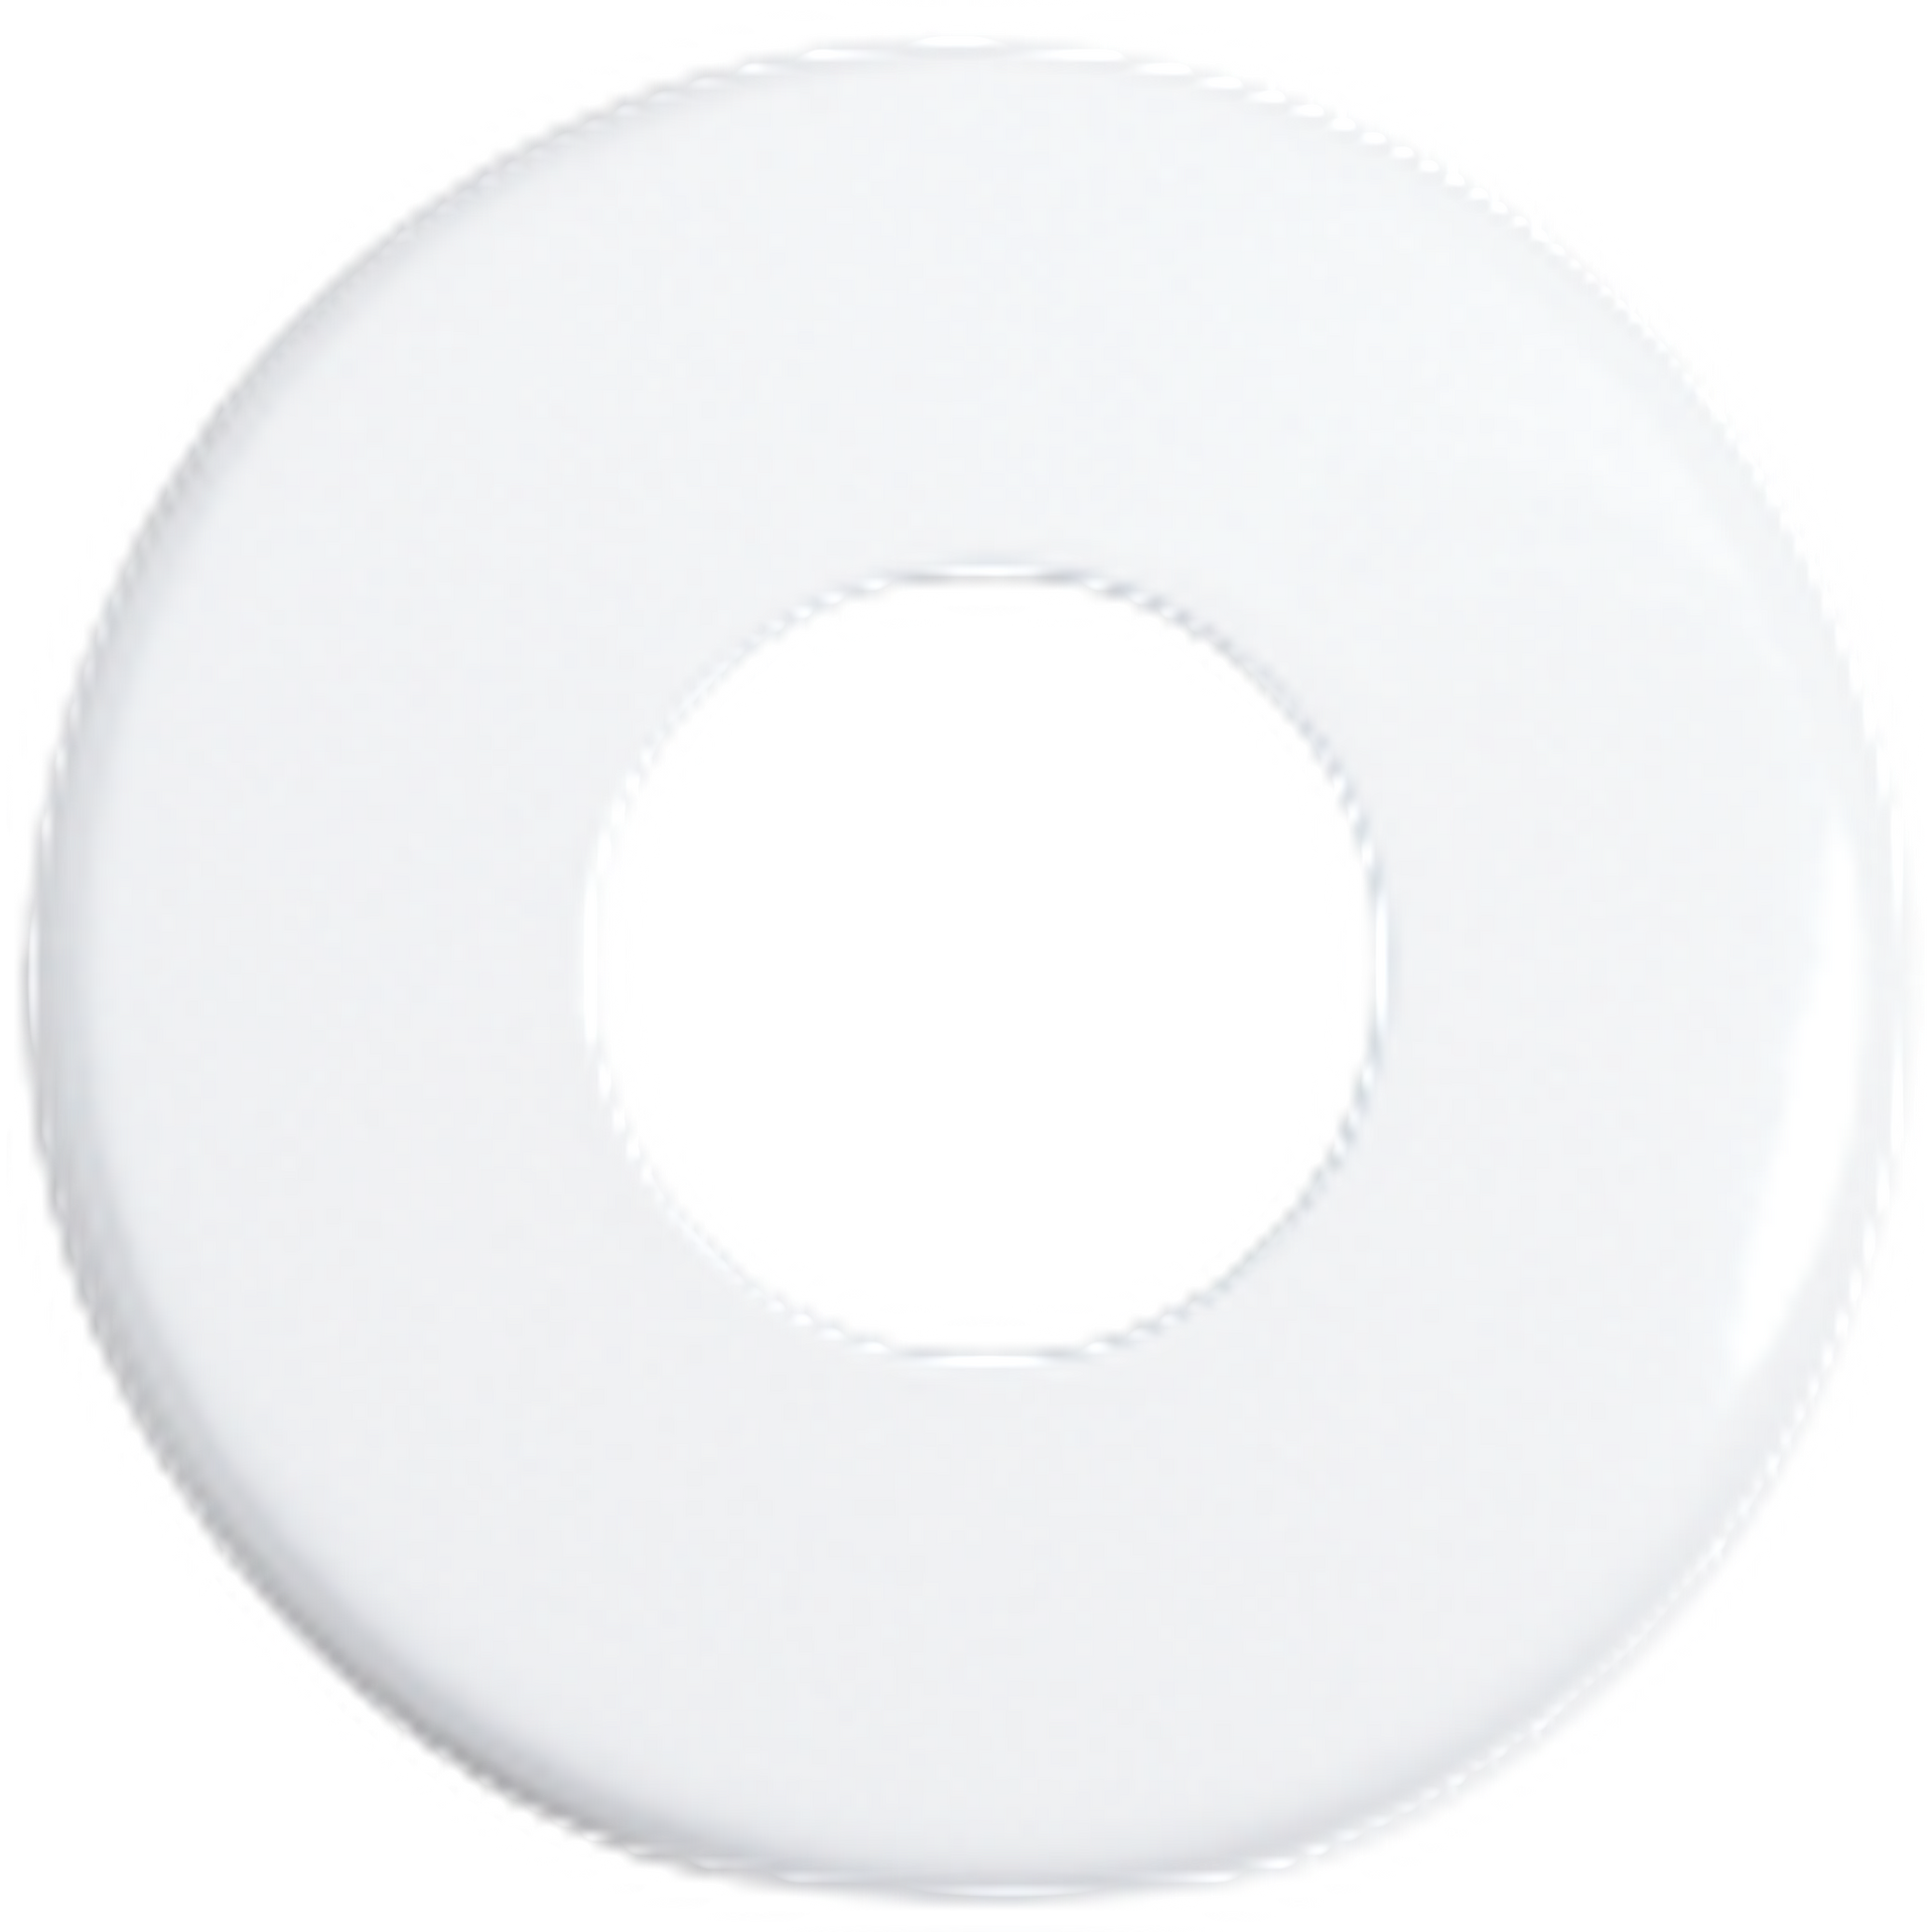 Seachrome Signature Series 2.5" Diameter White Wrinkle Powder Coat Concealed Mounting Flange and Bracket Set for Shower Rod